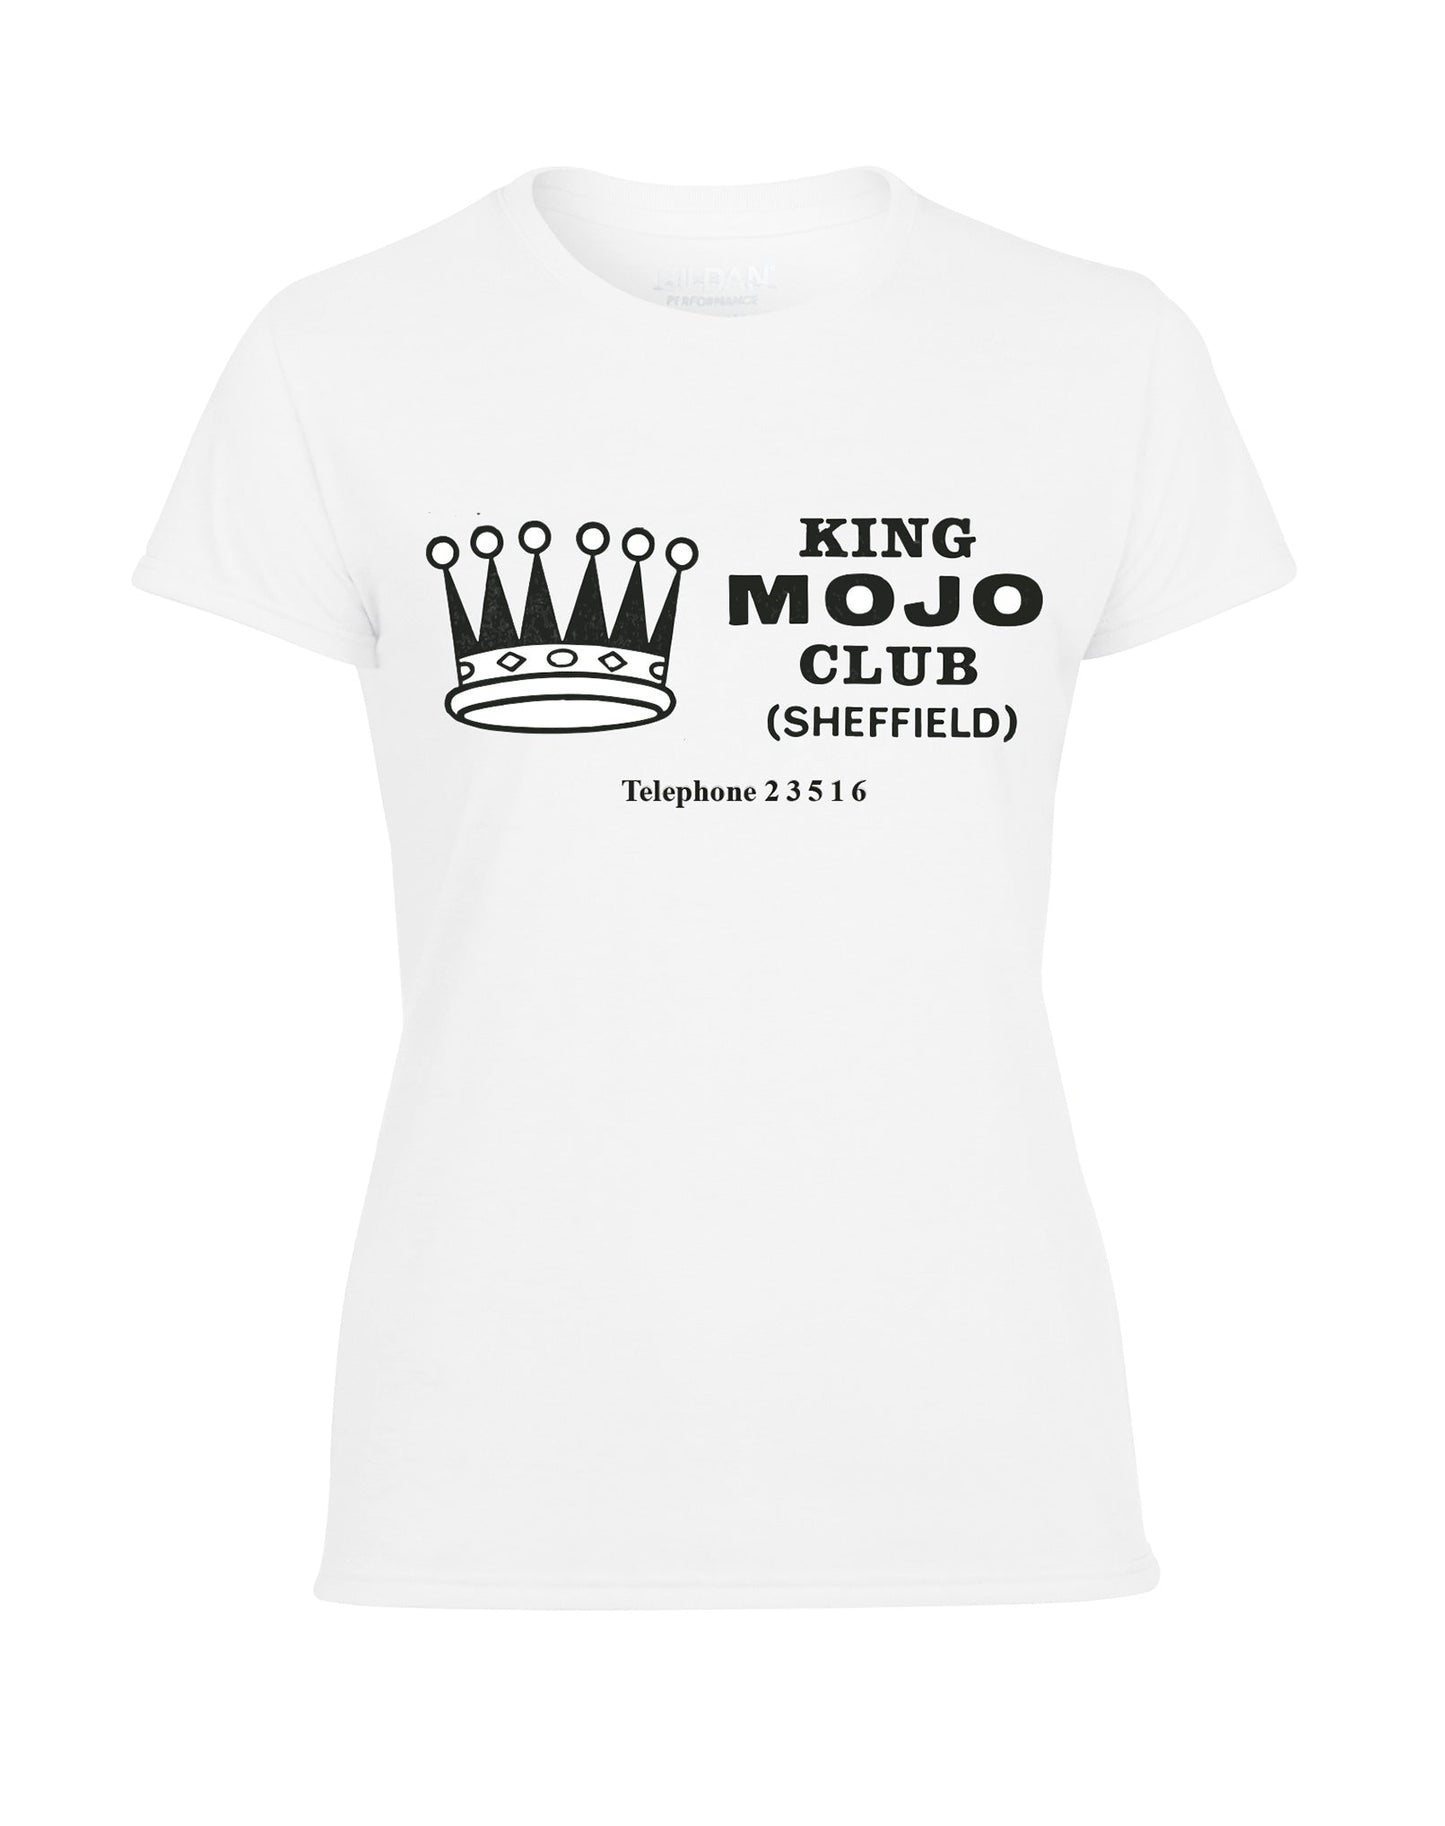 King Mojo ladies fit T-shirt - various colours - Dirty Stop Outs